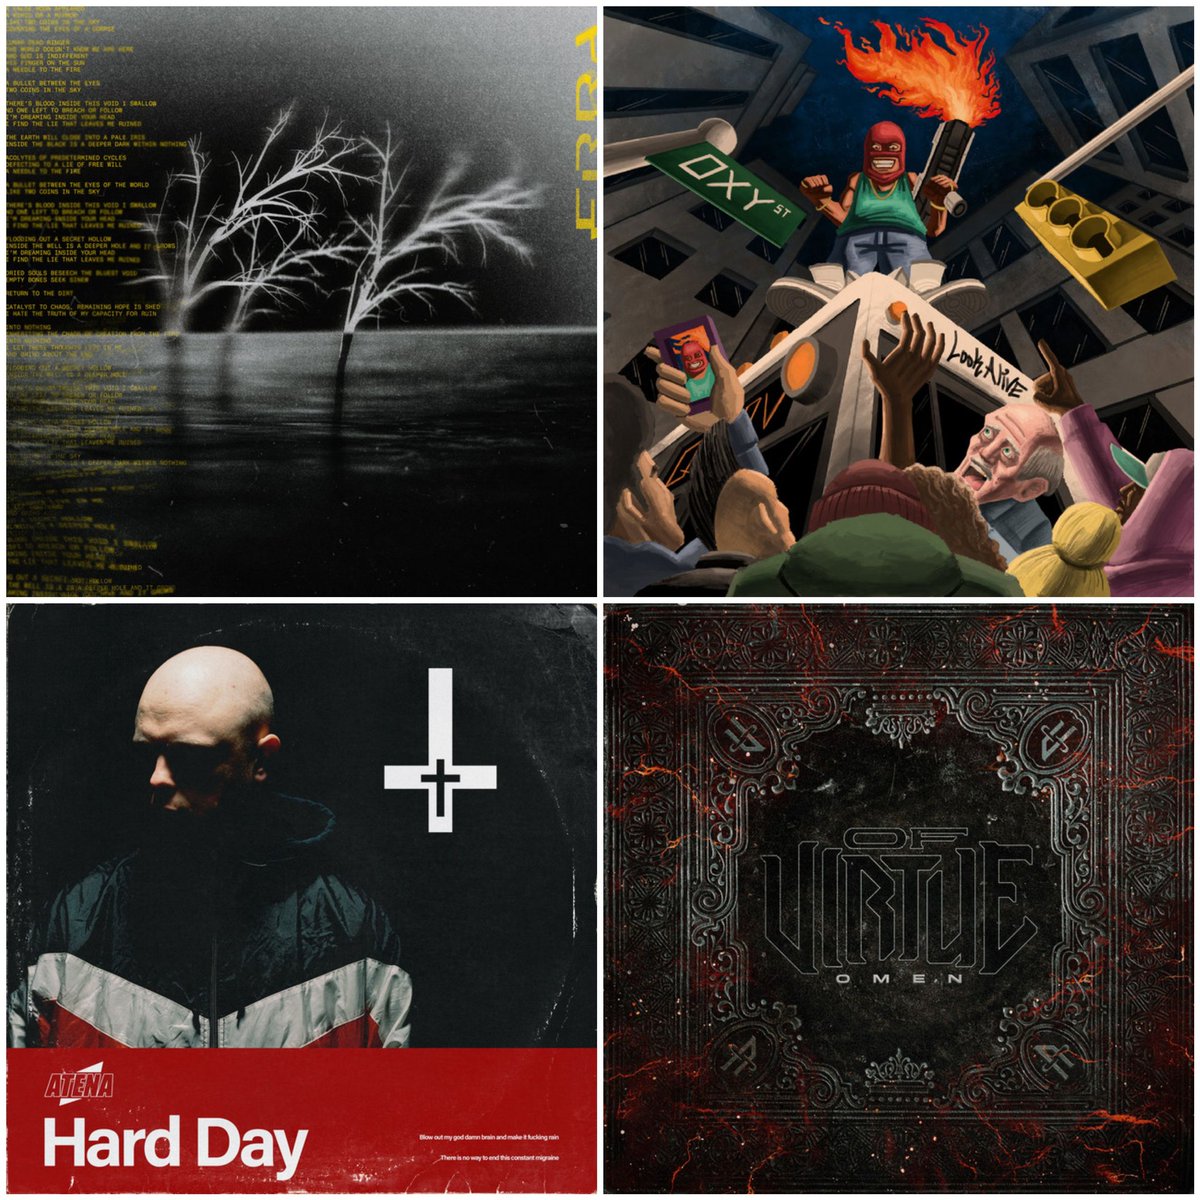 Today's New Releases 

@Erra_Band - Pale Iris
@OXYMORRONS - Look Alive (Netic)
@atenaband - Hard Day
@OFVIRTUE - Holy

#Erra #Oxymorrons #Atena #OfVirtue